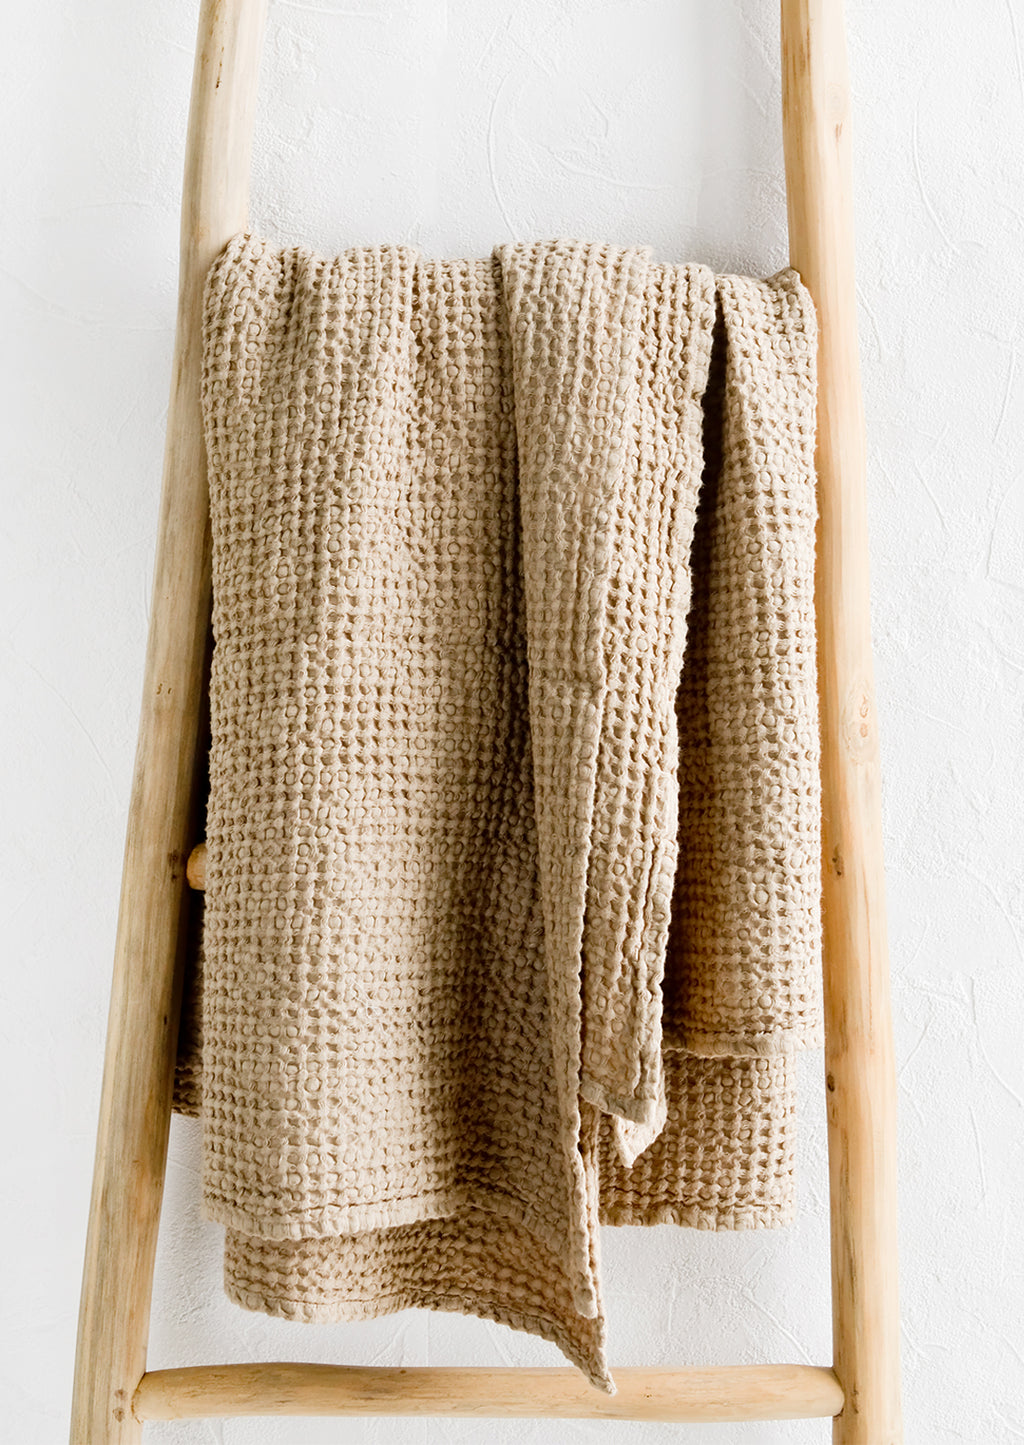 Beige / Full: A waffled throw in beige folded over a display ladder.